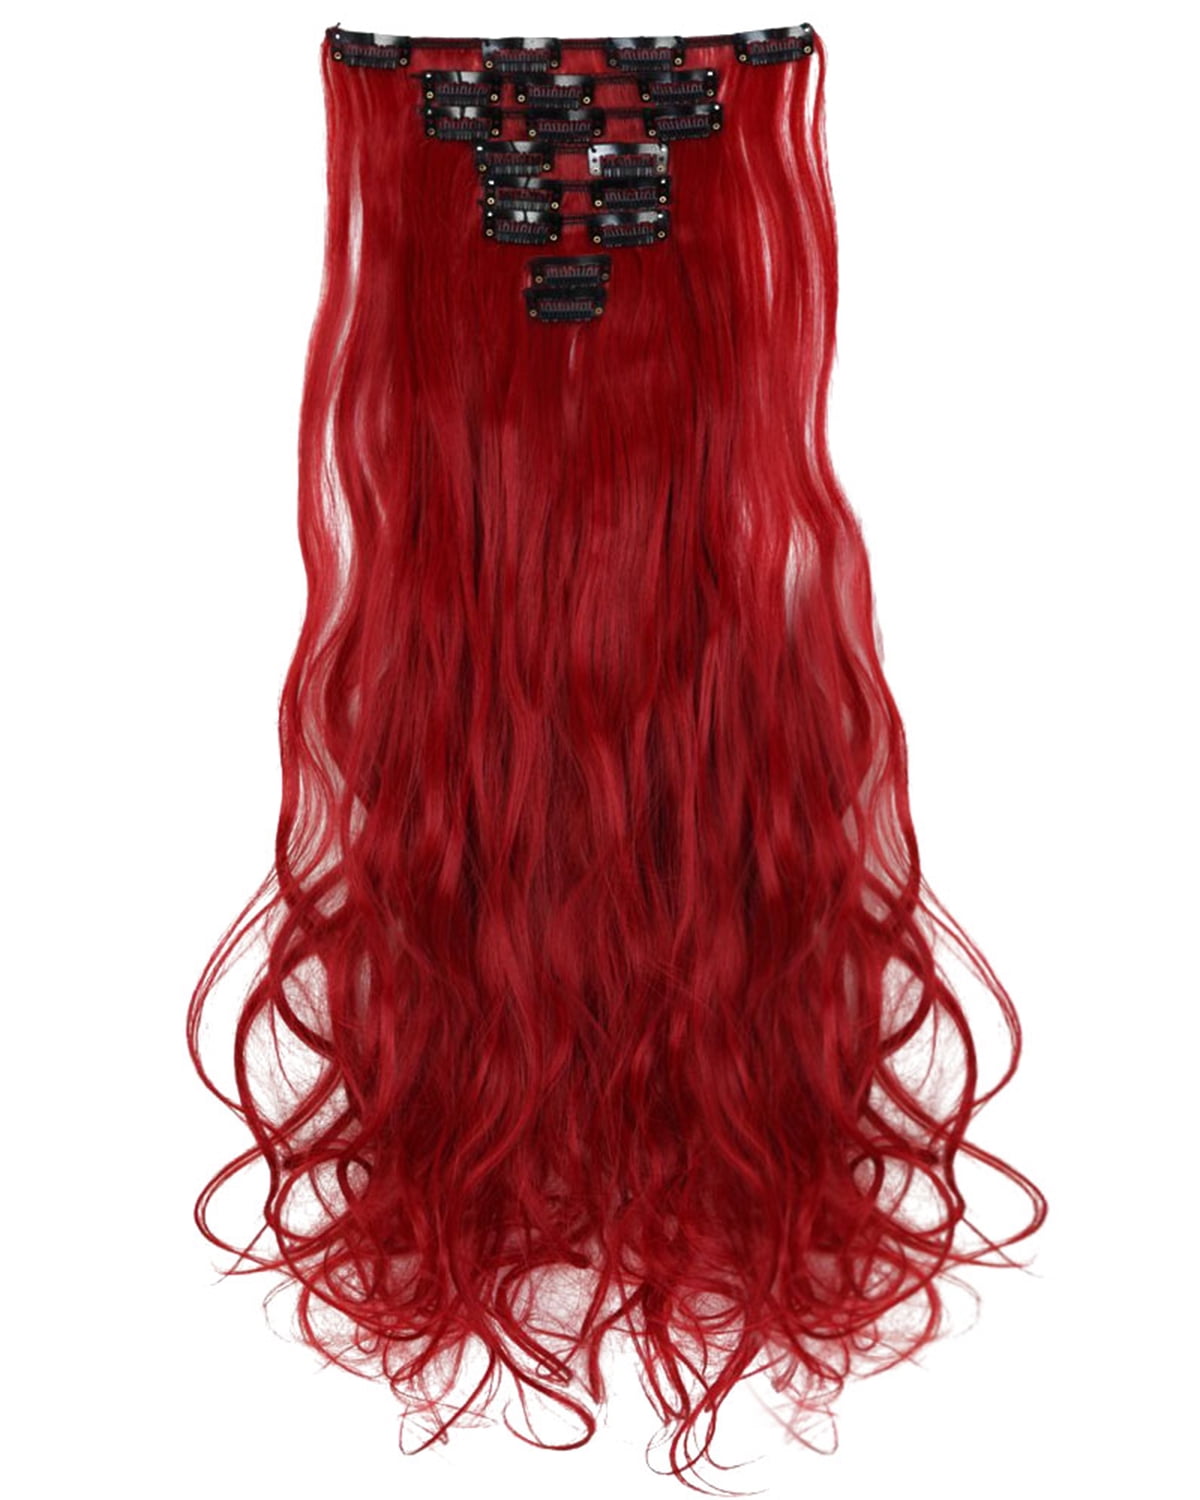 red hair pieces clip in